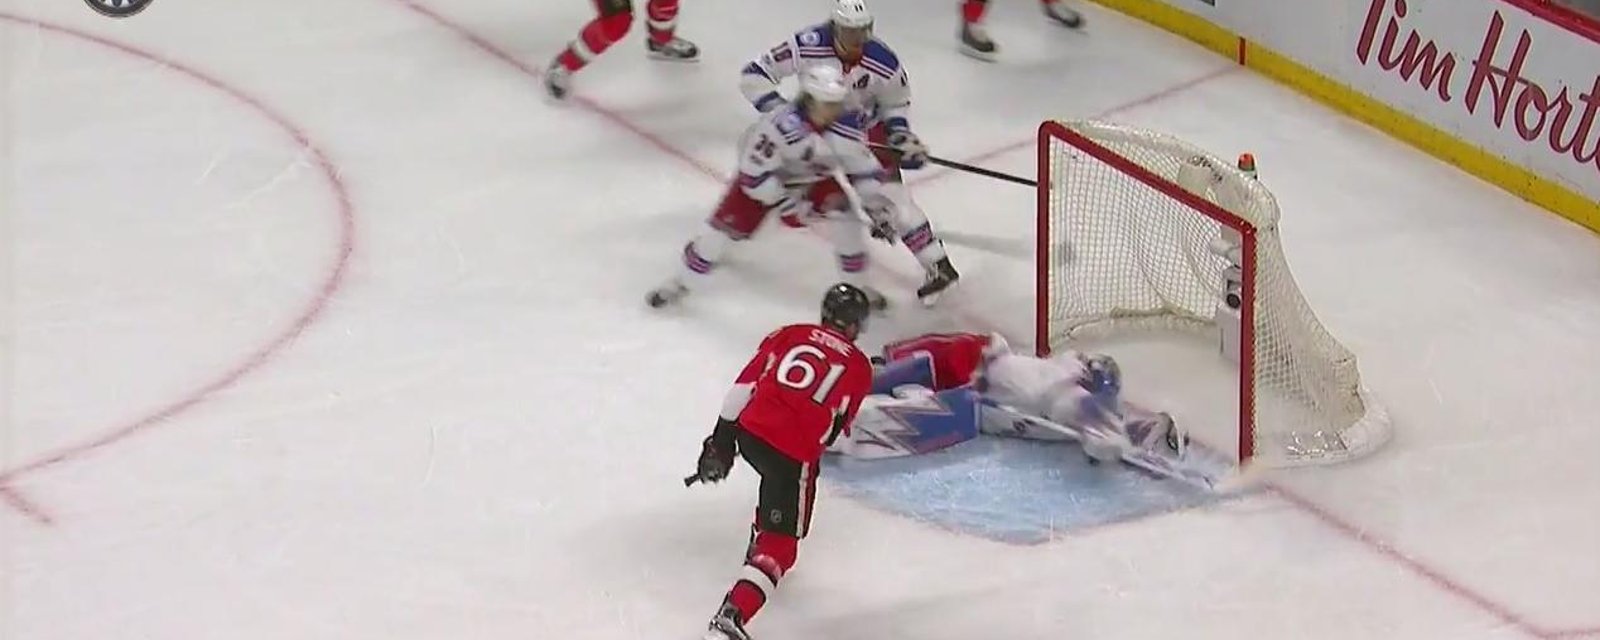 Lundqvist with the absolute steal on Stone! 